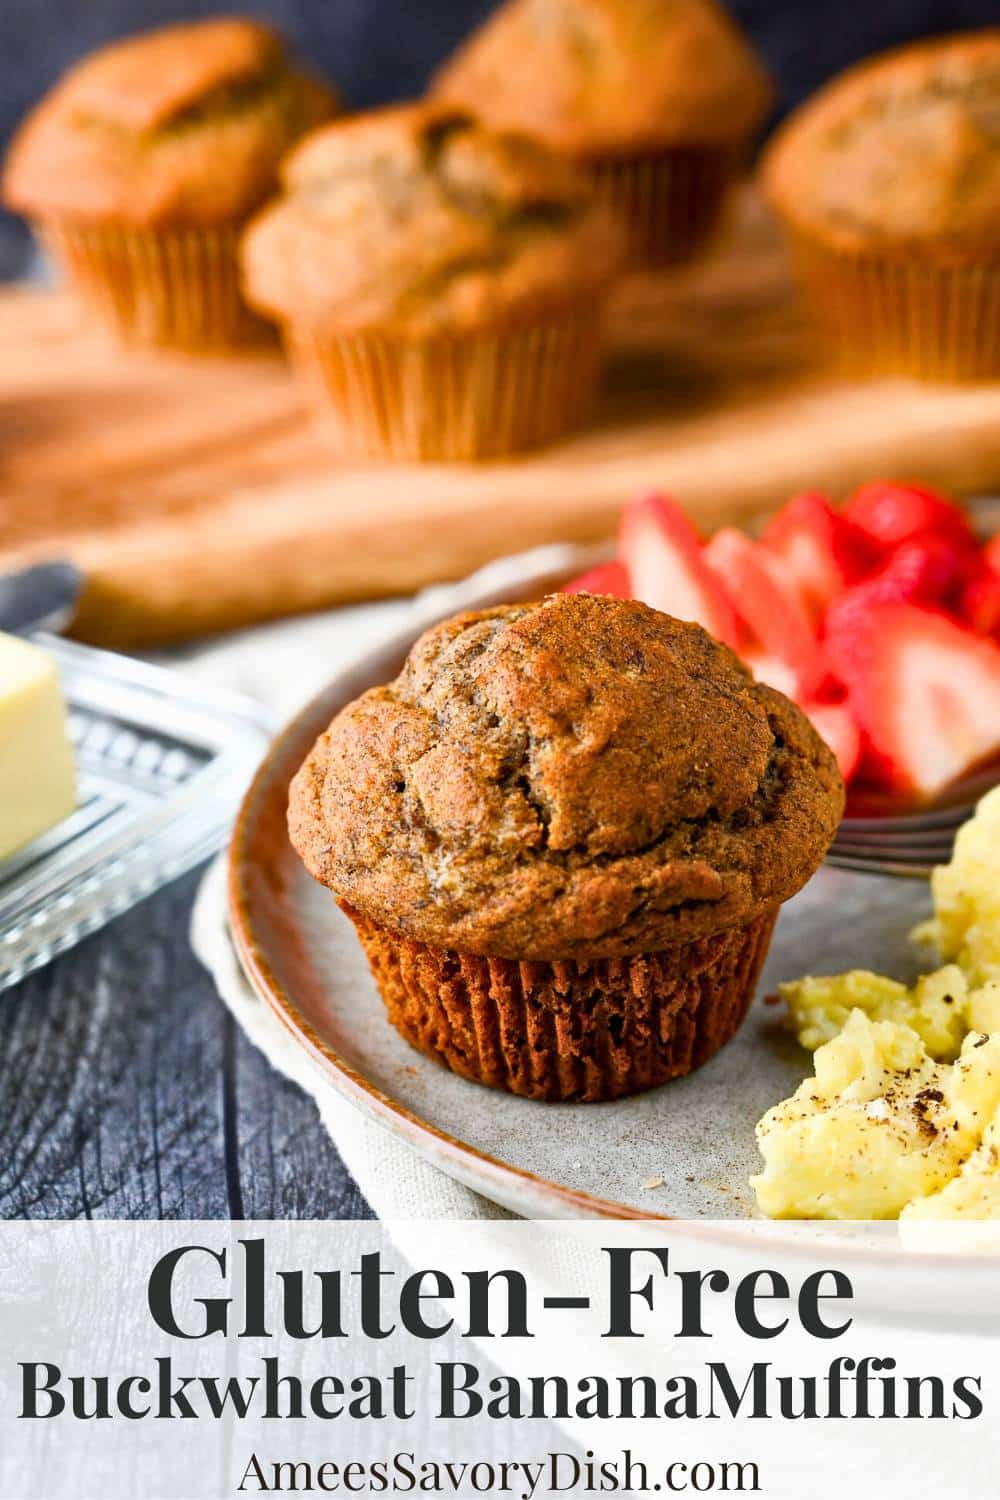 This small batch recipe is made from scratch with naturally gluten-free ingredients, creating 6 bakery-style moist and flavorful muffins. via @Ameessavorydish